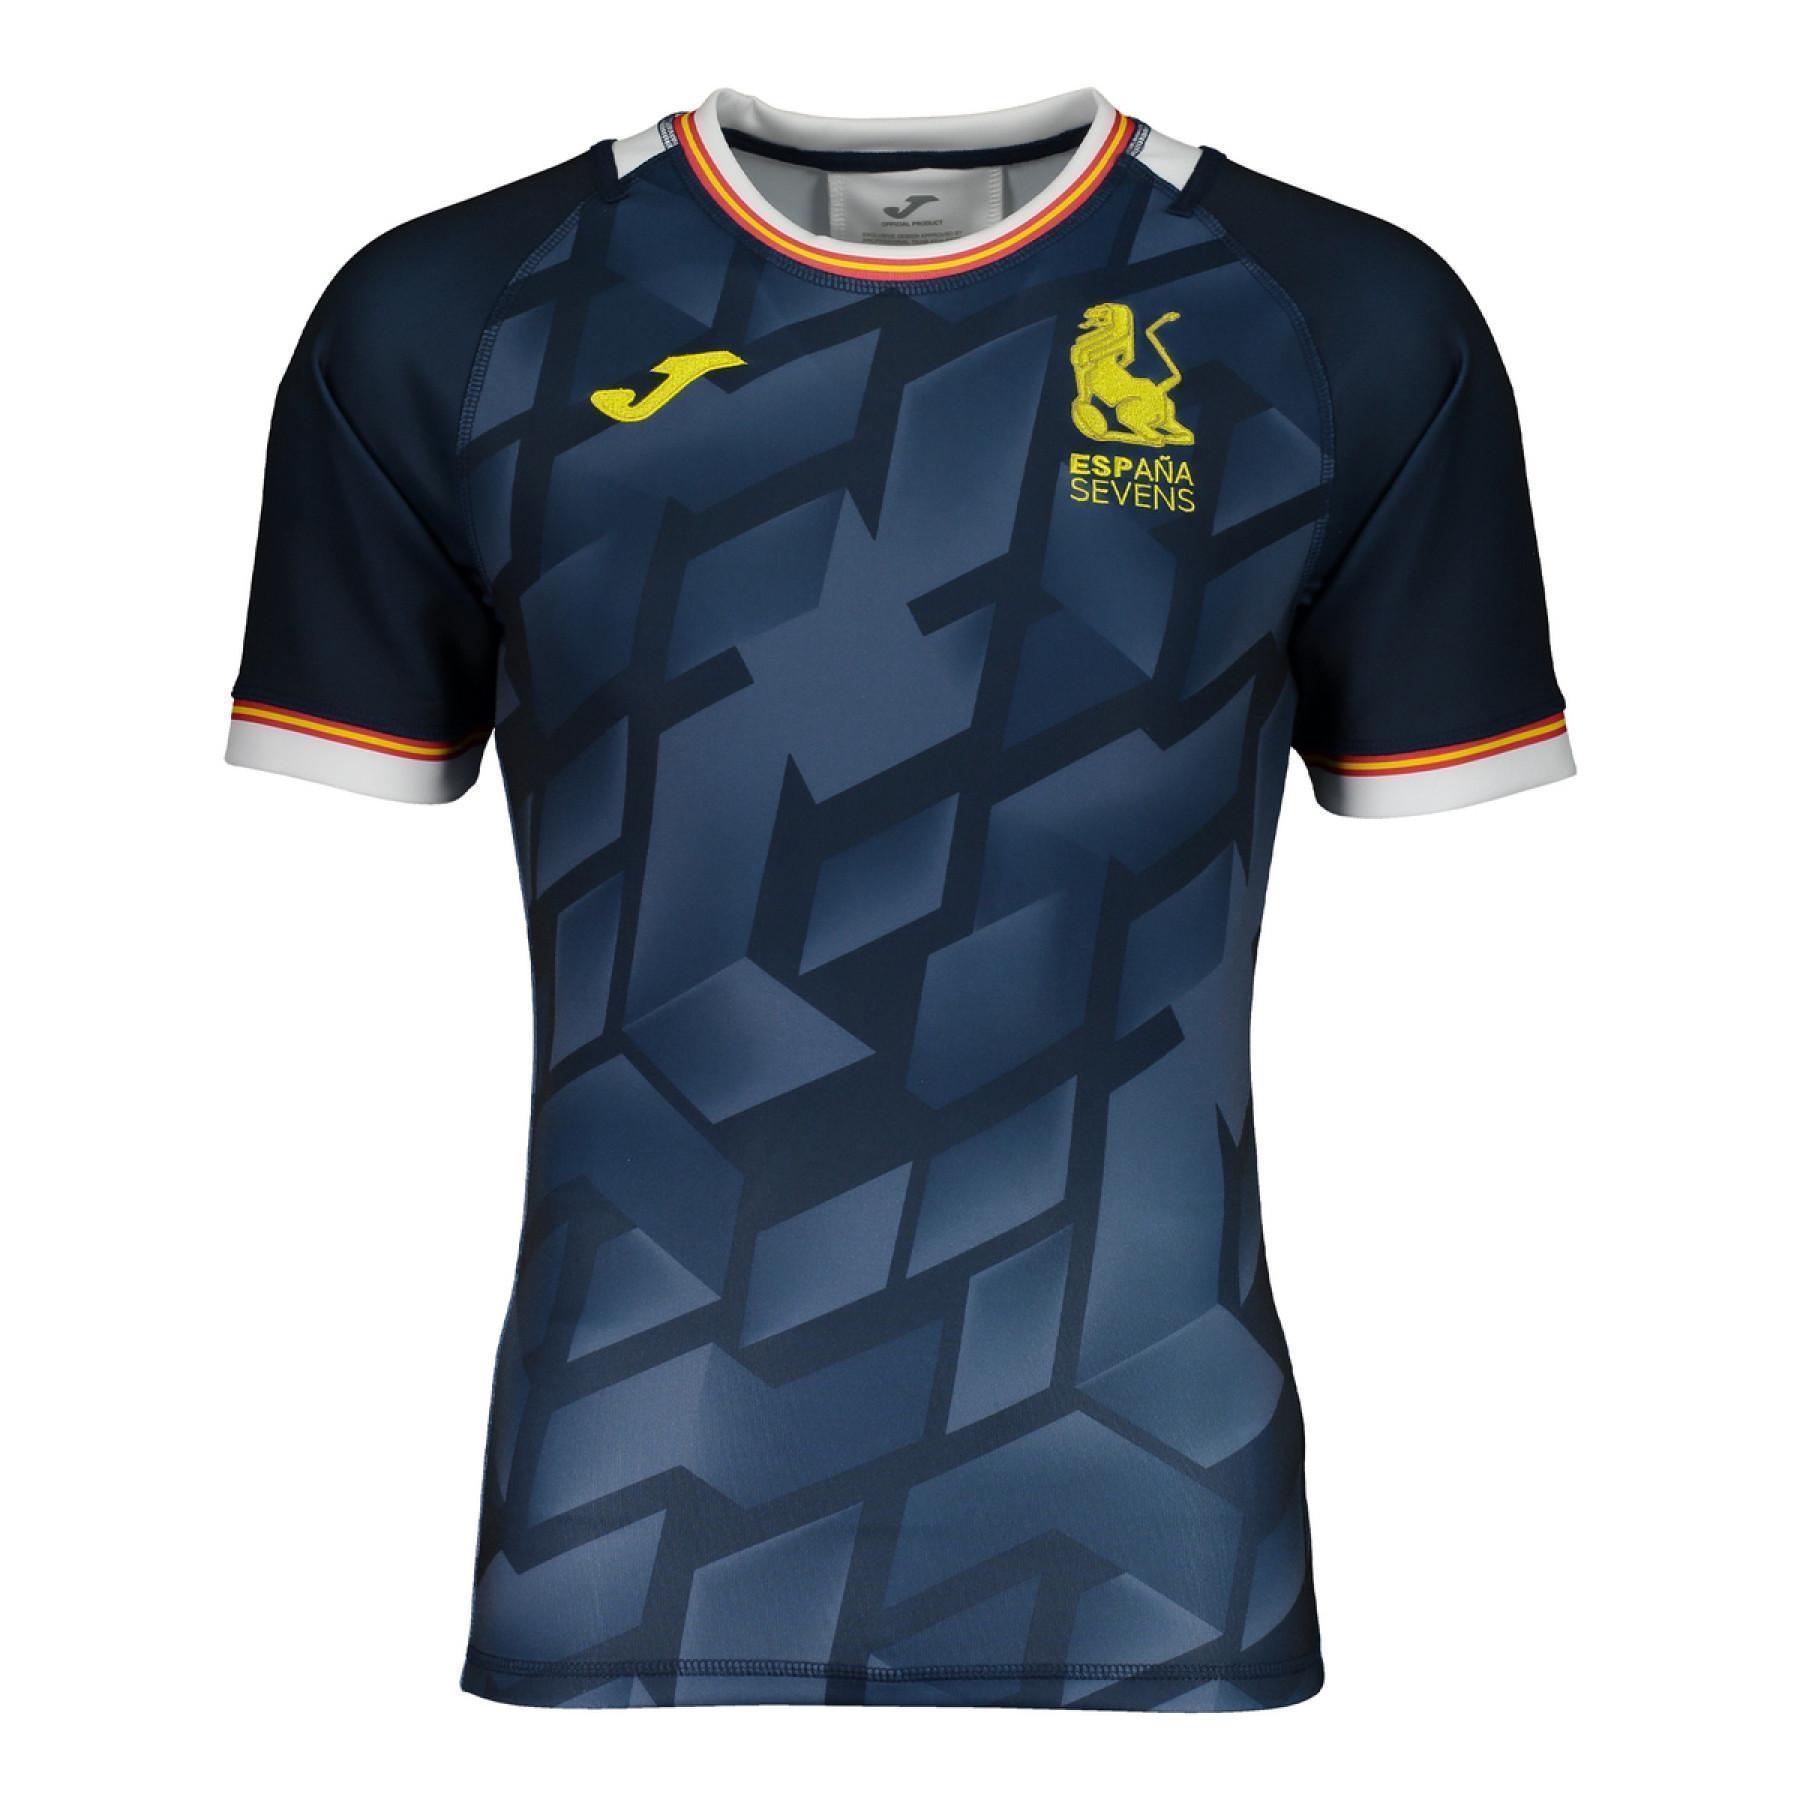 Fourth jersey Espagne Rugby 2020/21